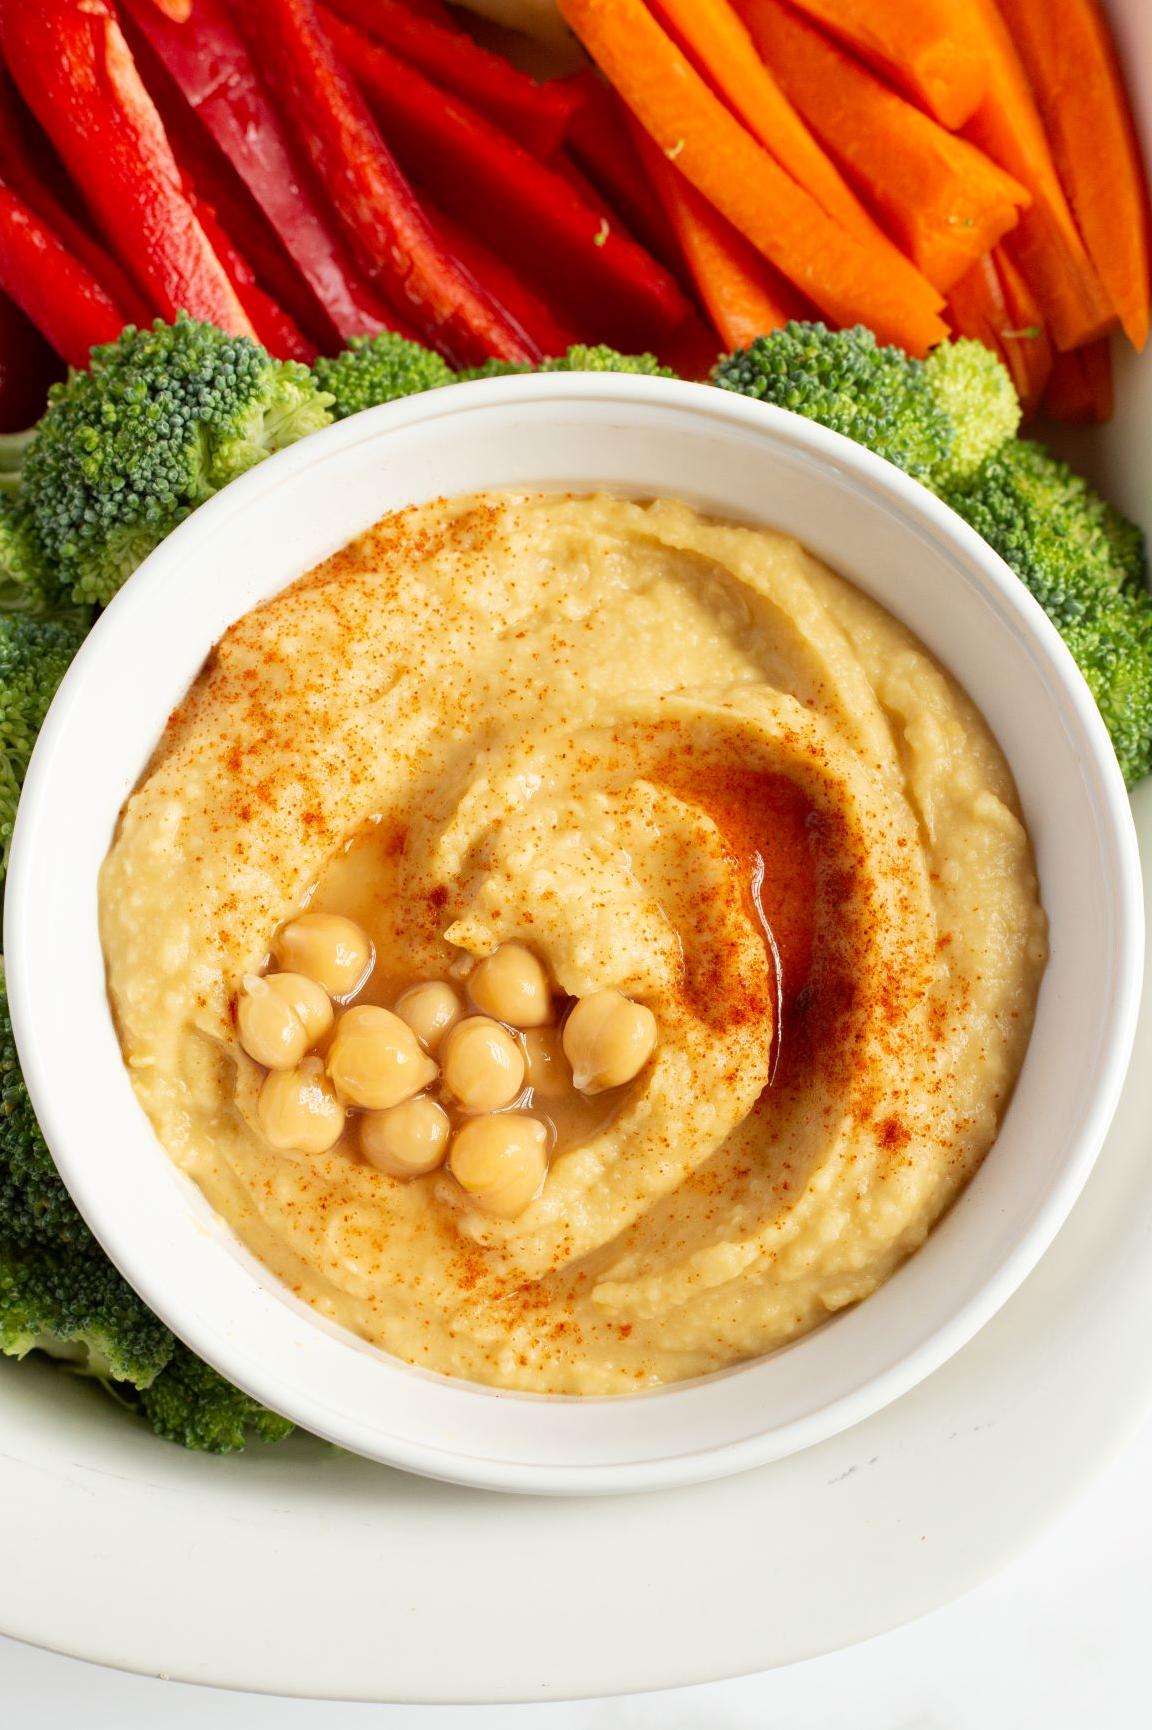  Hummus, the healthy alternative to dip all your veggies in!